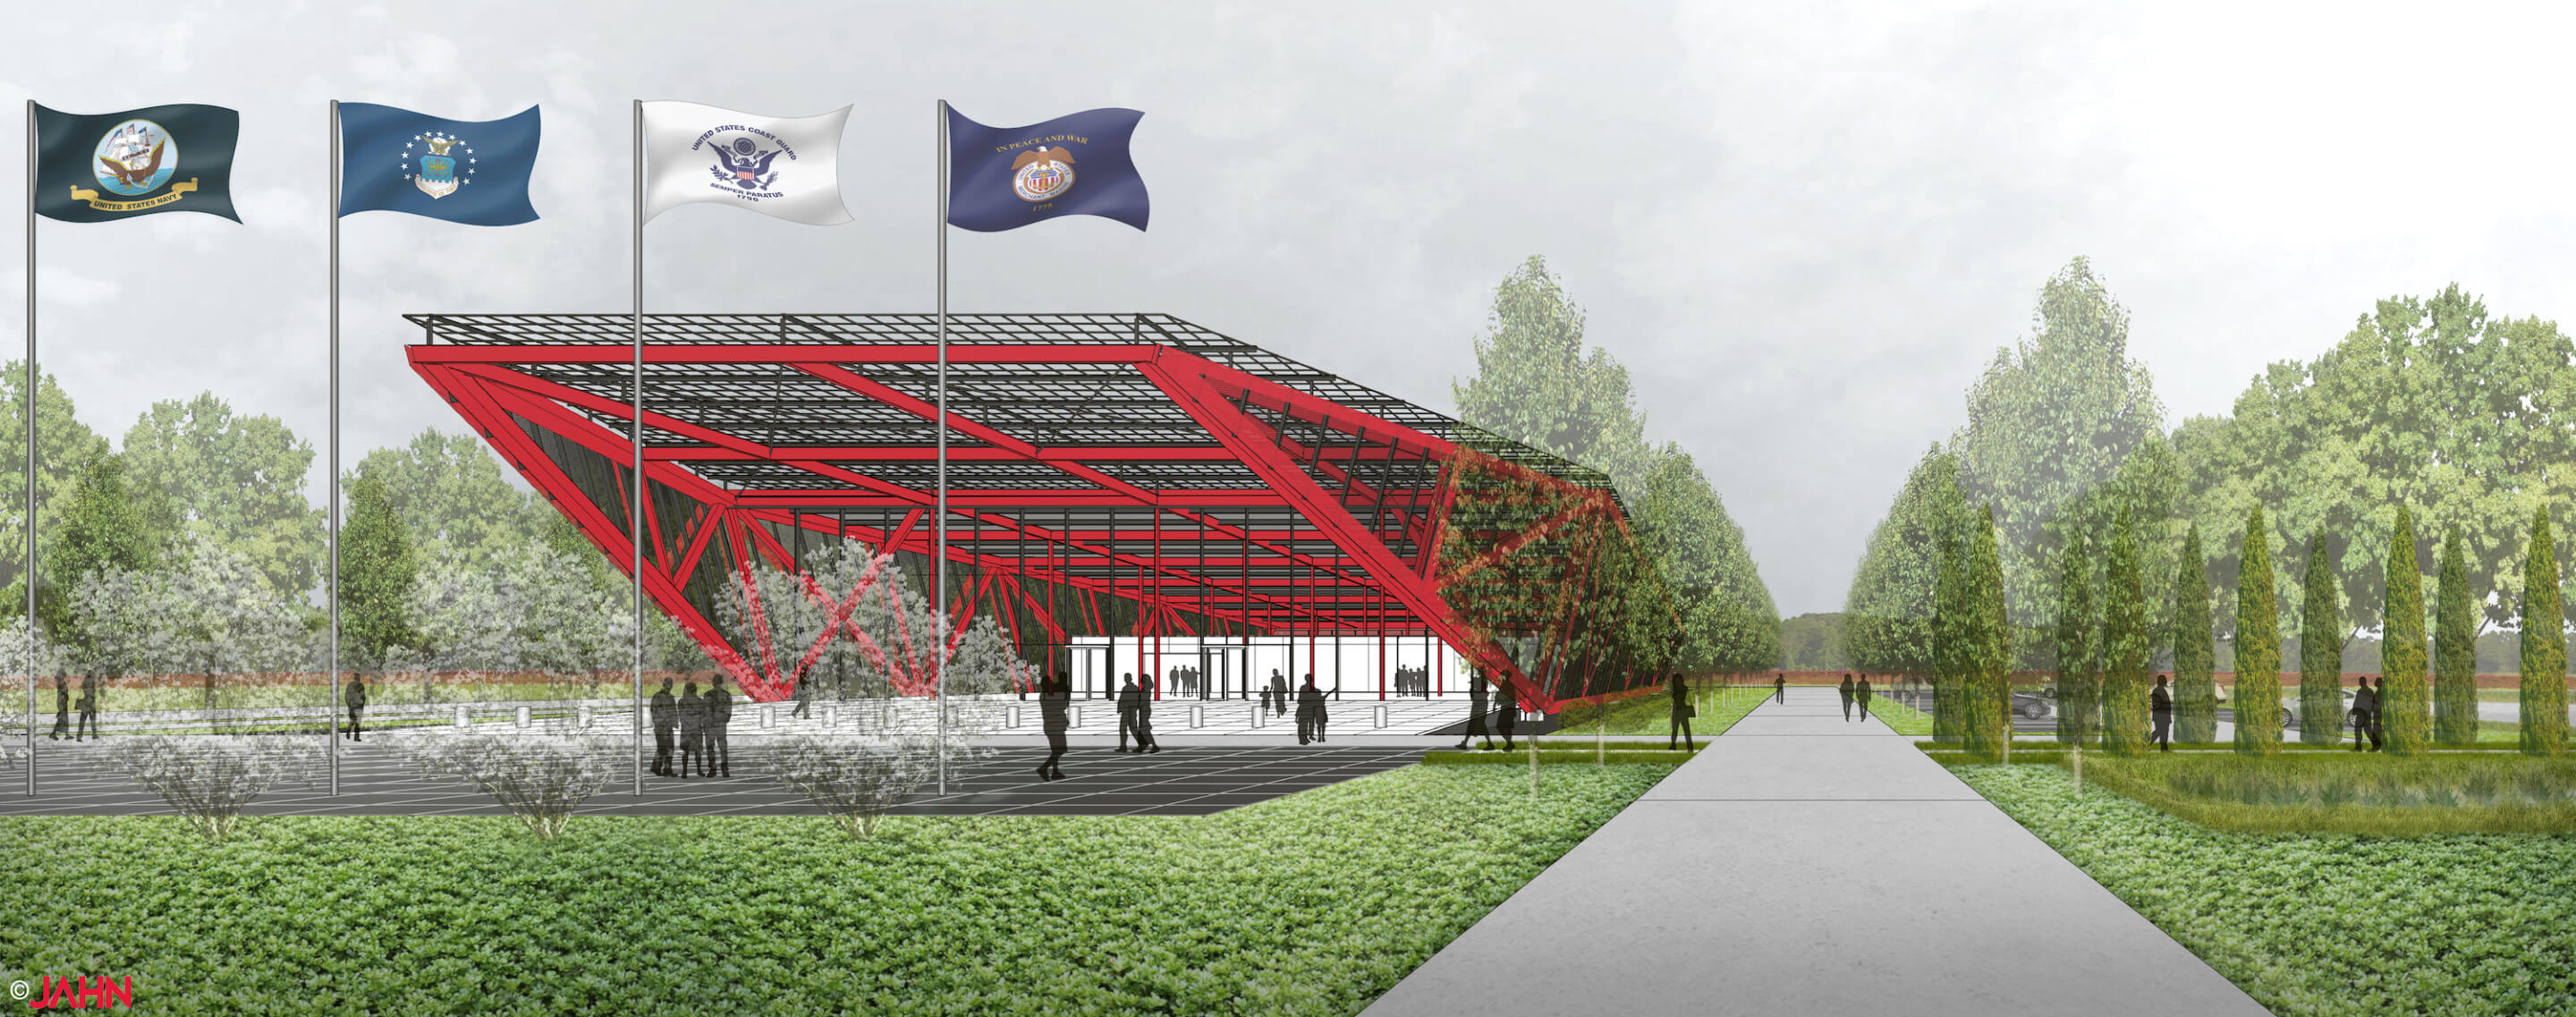 rendering of an exhibition building with red trusses